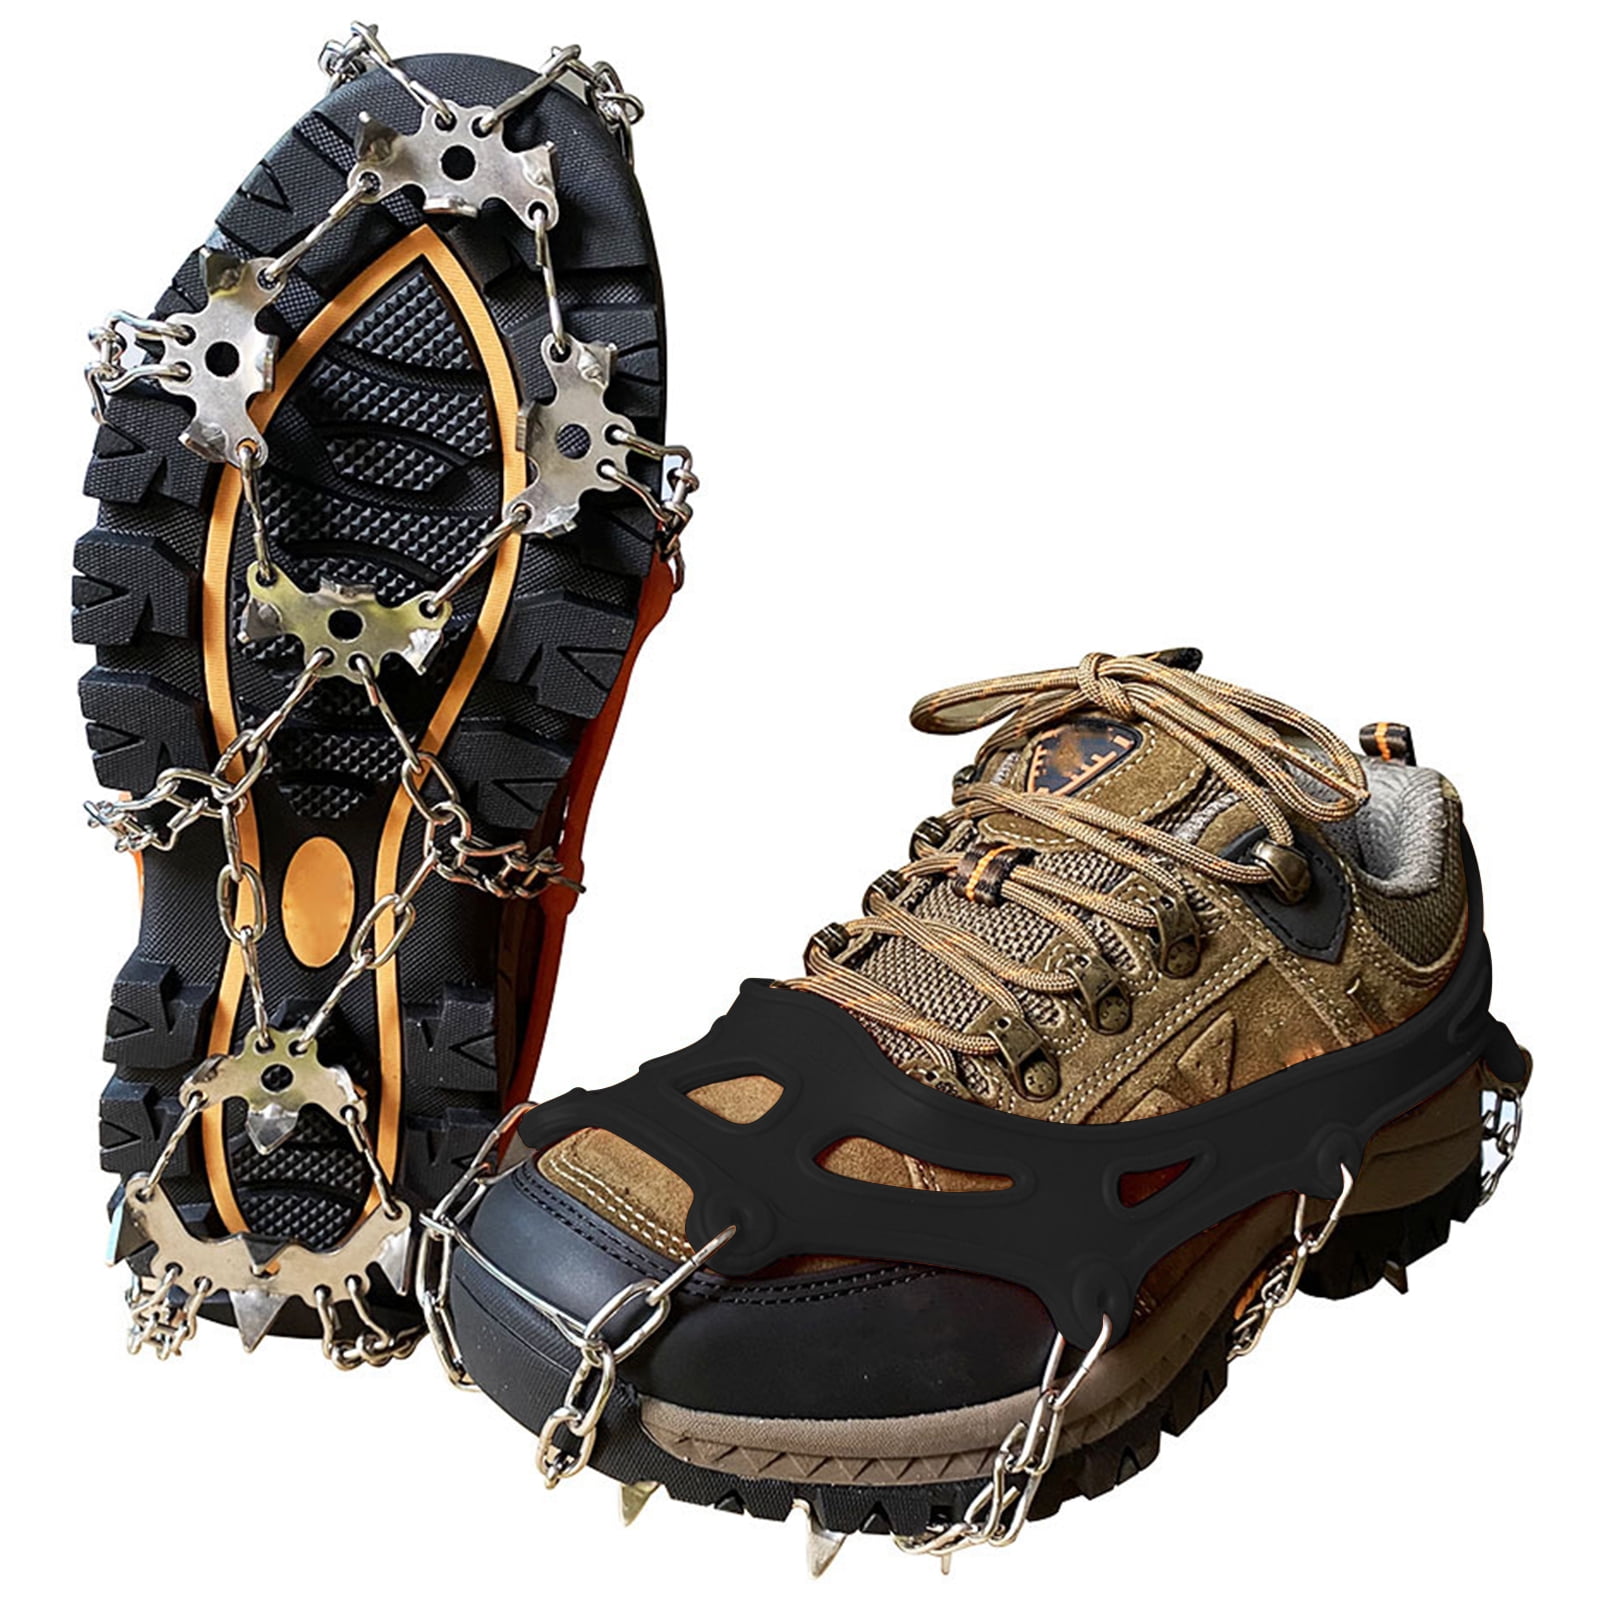 Crampons Ice Snow Grips Traction Cleats Shoes Grips with 19 Spikes for Medium 